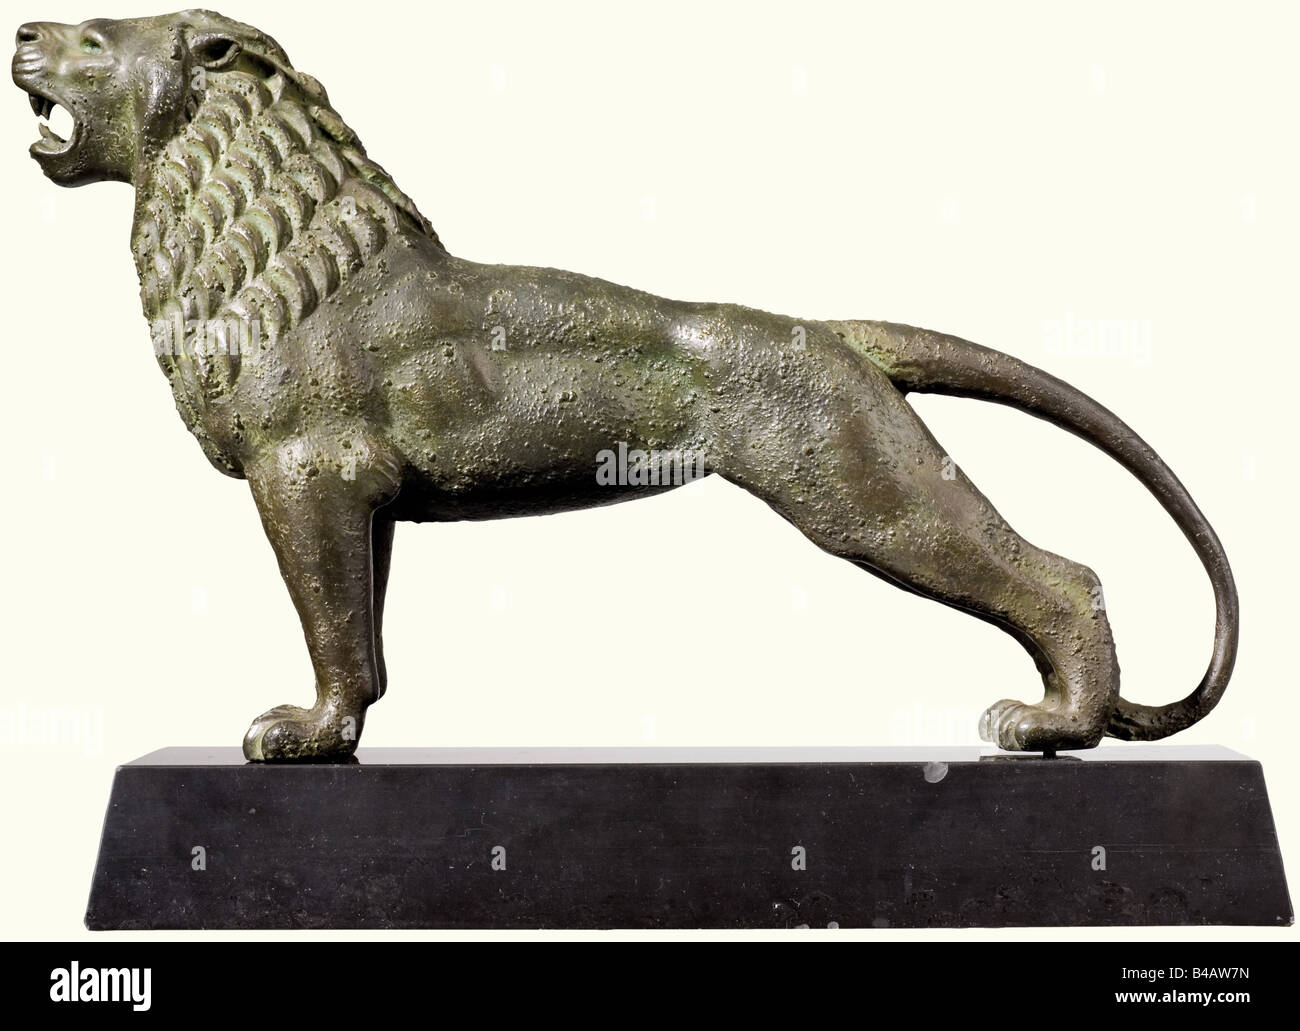 Jacques Benoist-Méchin - Barbary lion, by Arno Breker (1900 - 1991)., Breker created this figure in 1970. Bronze, the underside of the paws signed 'Arno Breker' and 'Guss Schmau'. Height 23 cm, length 34 cm. On black marble base. A present from Breker to Benoist-Méchin. The Barbary lion can be found on a sketch of the 'Monument for the Liberation of Africa', on which Breker began to work in 1970 at the request of King Hassan II of Morocco. It was to be errected at the United Nations Square in Casablanca. Breker received the commission for this project through t, Stock Photo